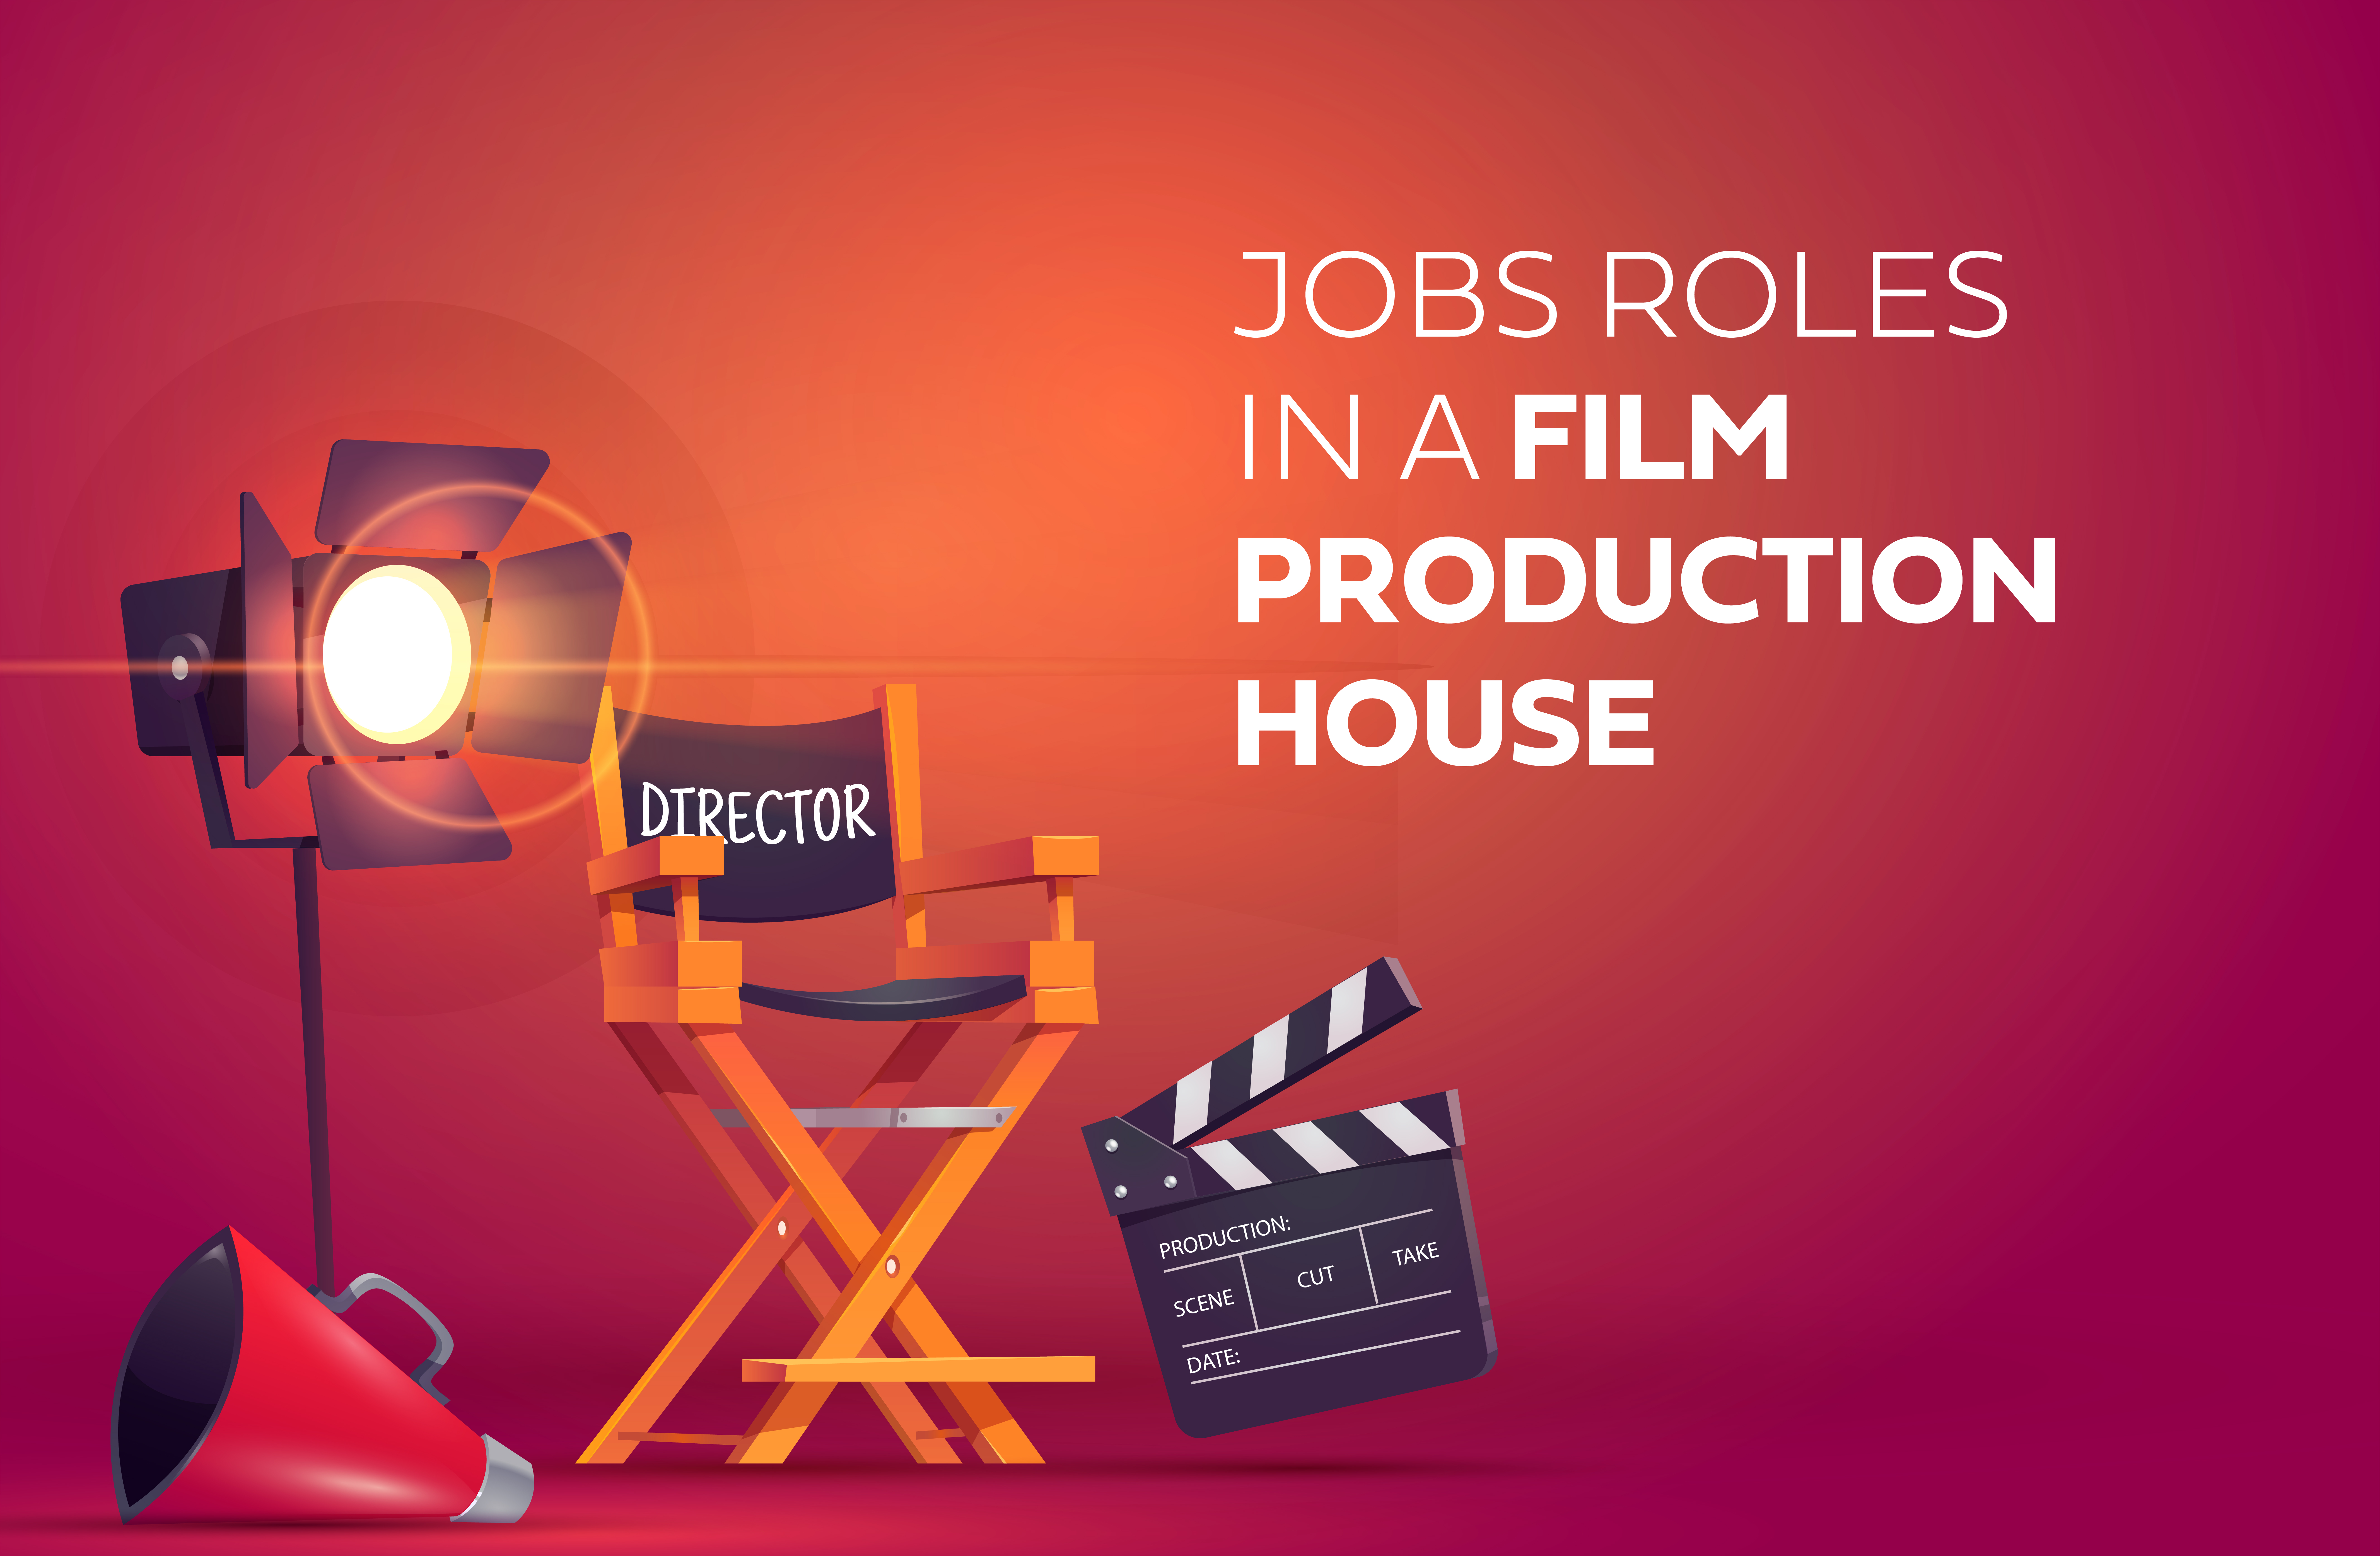 Staff Categories Of A Film Production House